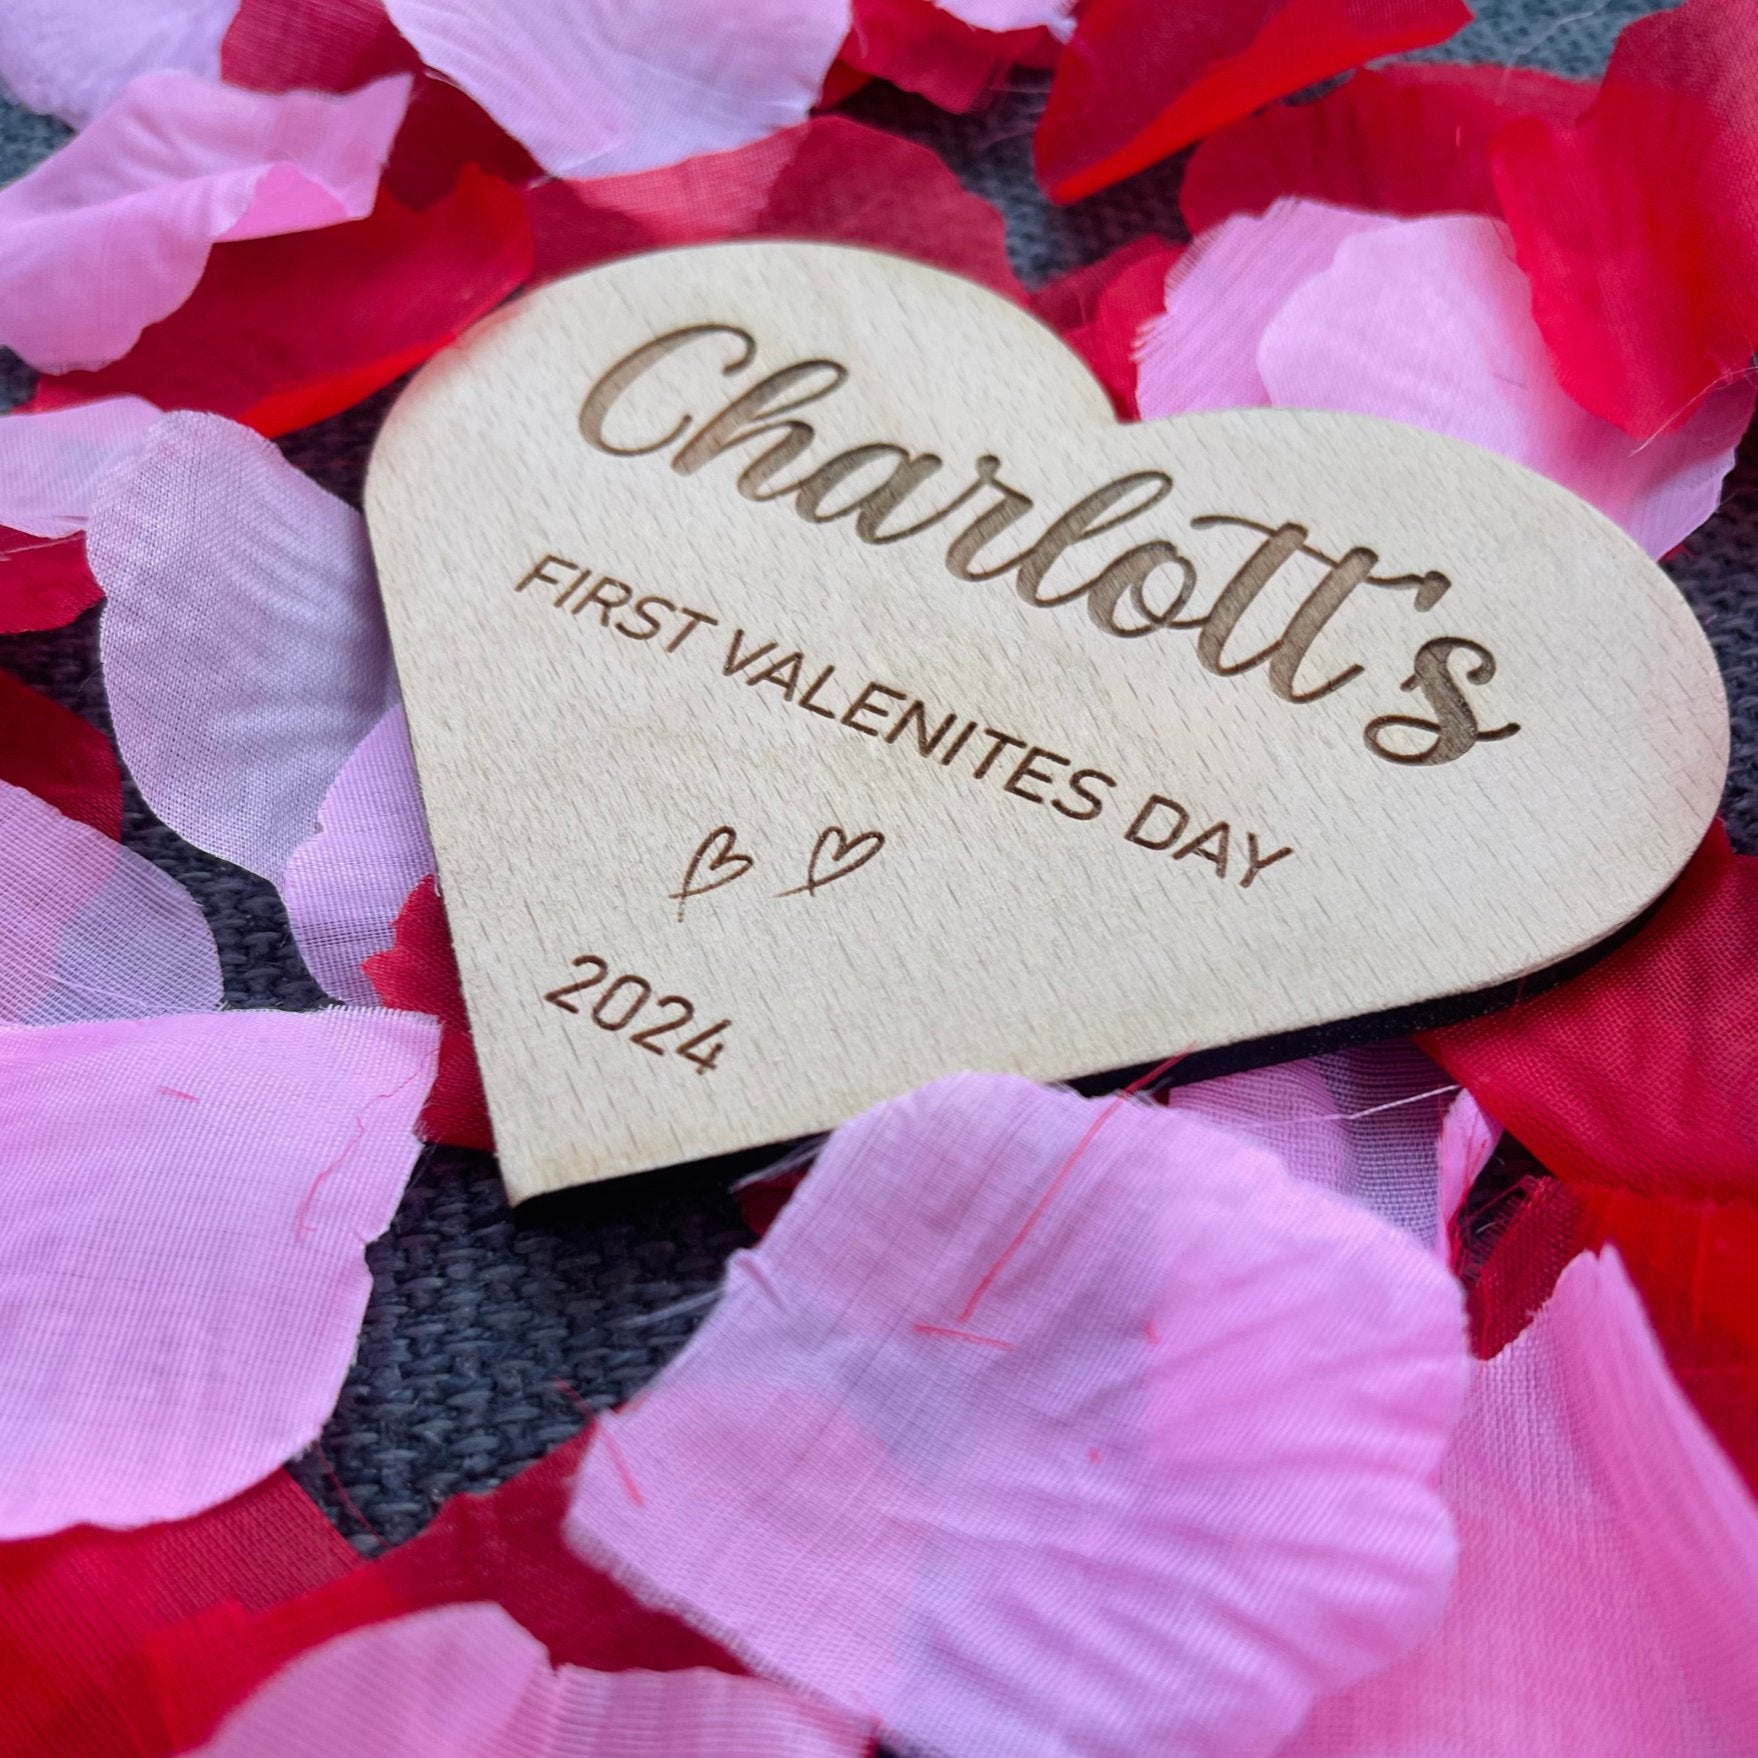 Capture the joy of your baby's first Valentine's with a personalised heart-shaped announcement plaque. Crafted from durable beech veneer, measuring 115mm x 100mm with a 4mm thickness – a thoughtful and timeless gift for new parents.